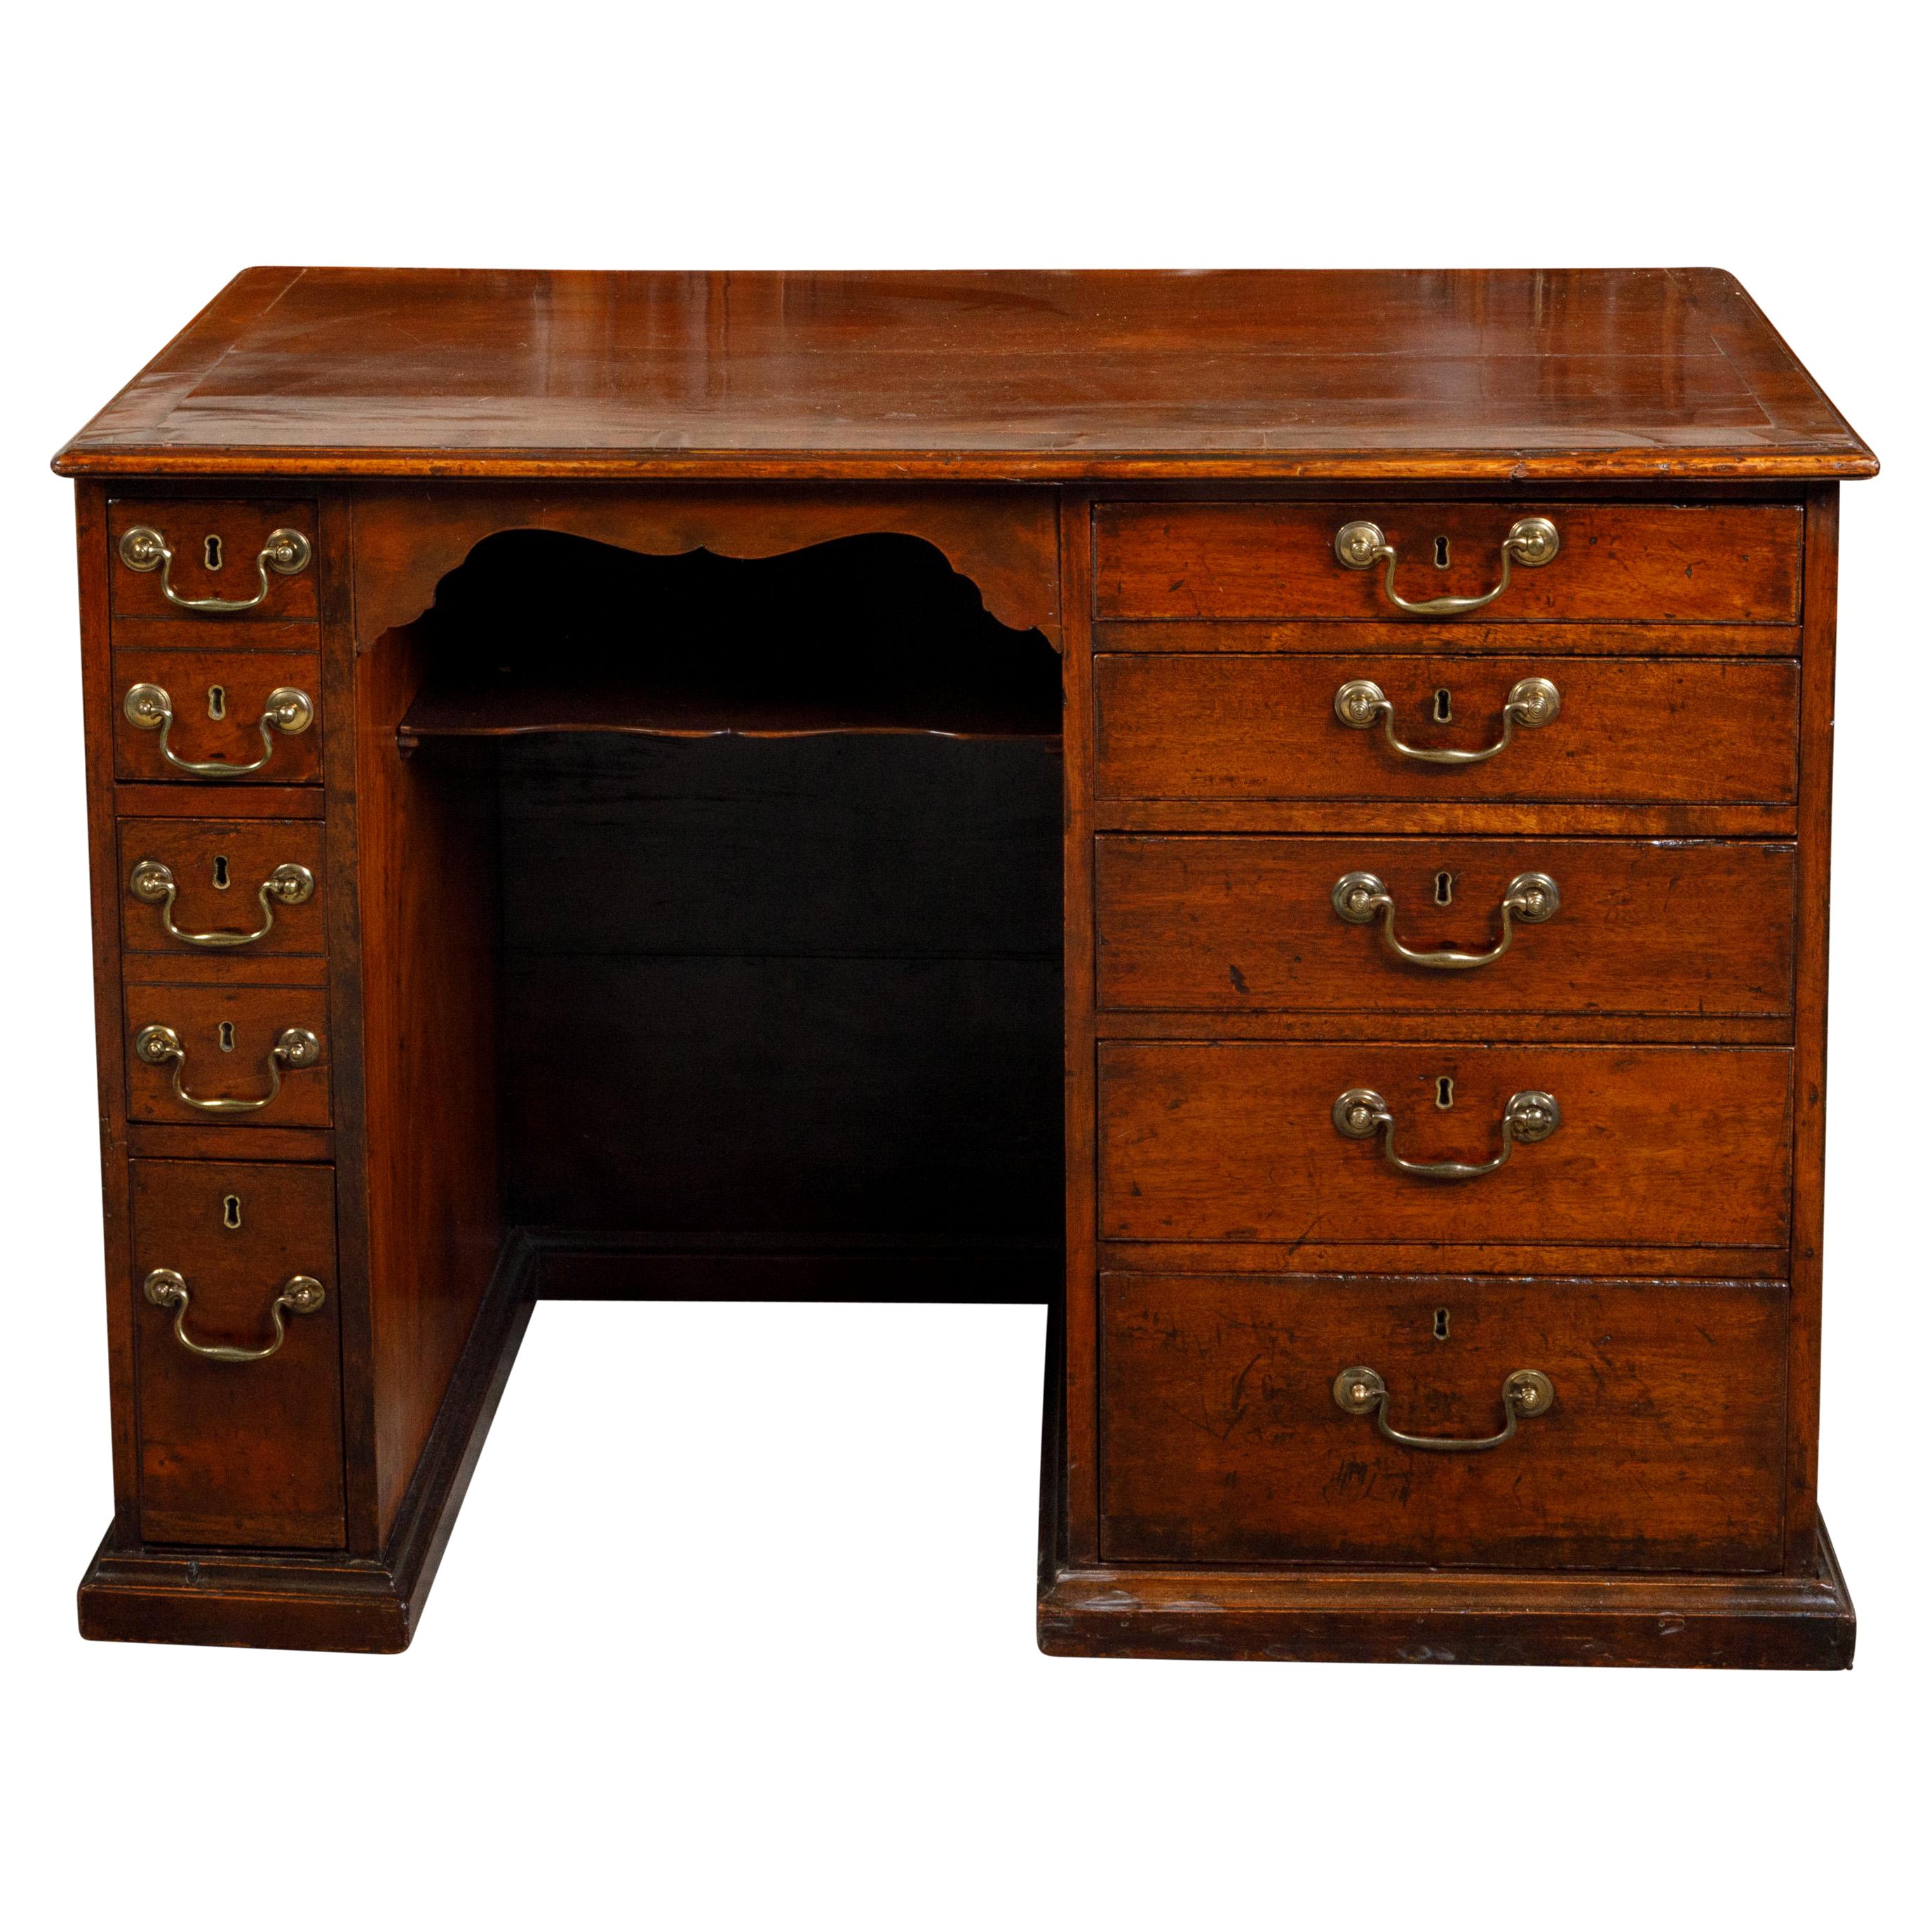 English Georgian Period Mahogany Desk with Ten Graduating Drawers and Shelf For Sale